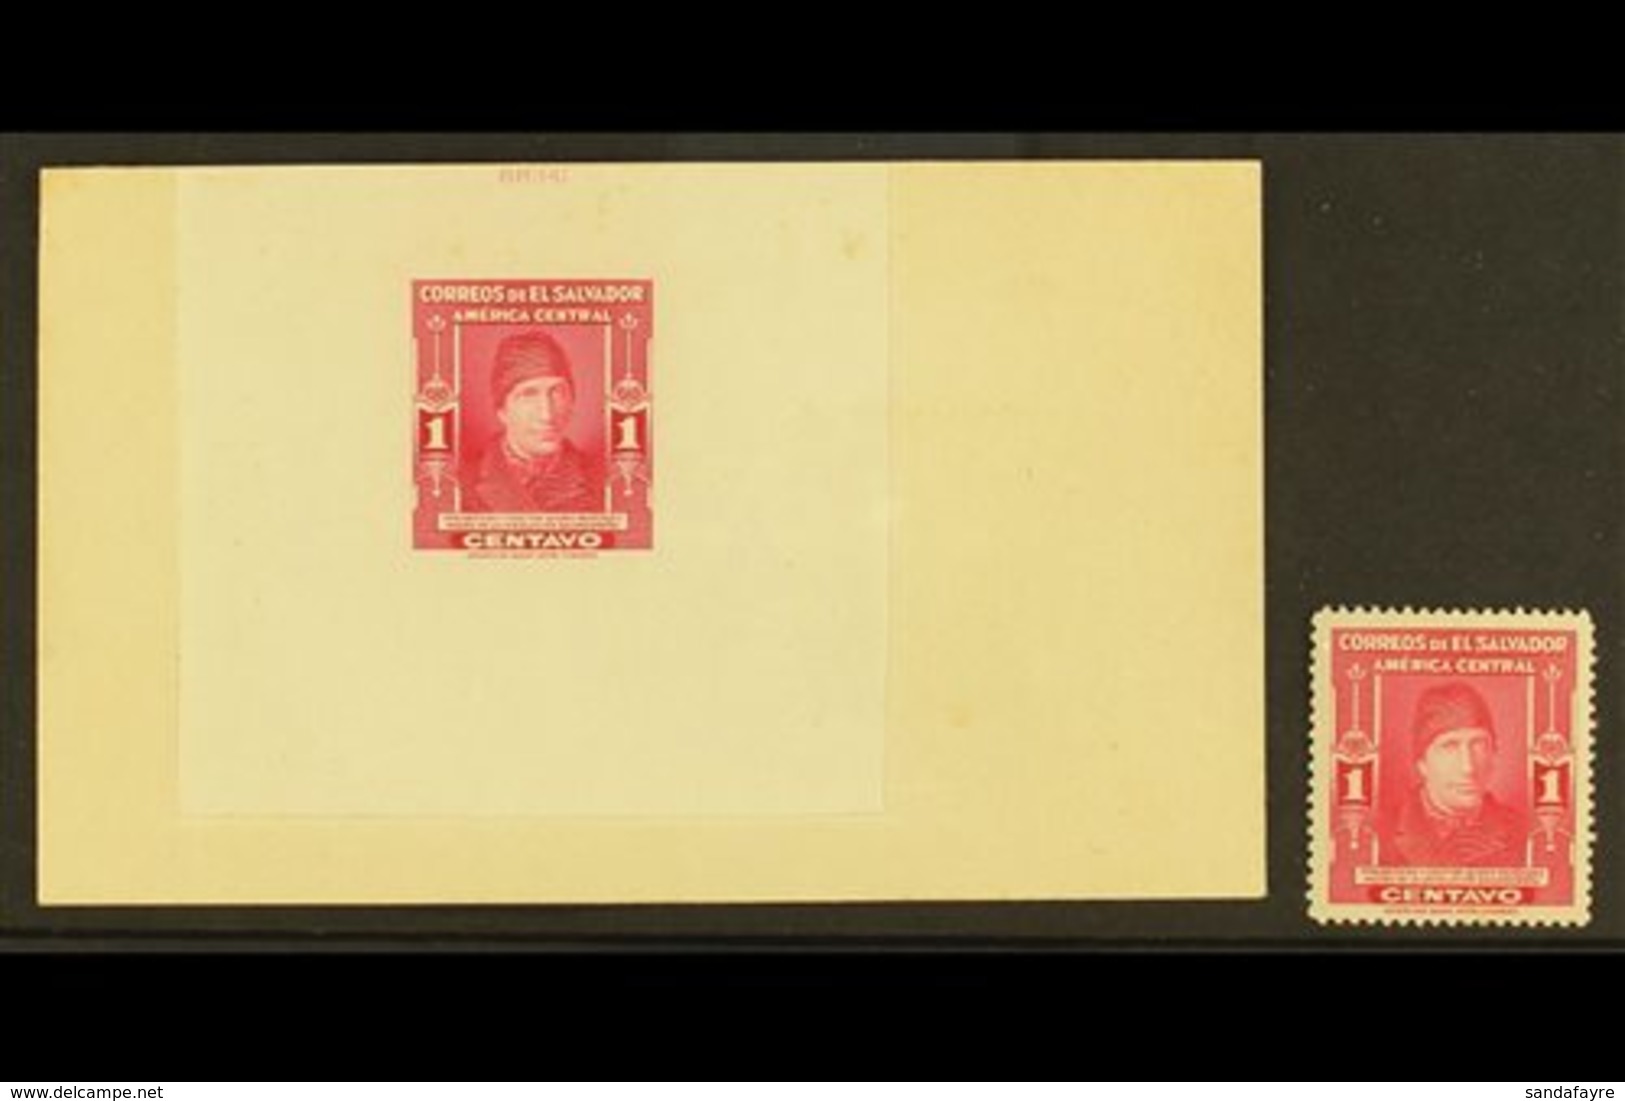 1947 1c Carmine Isidro Menendez (SG 950, Scott 596) - A DIE PROOF Affixed To Sunken Card, With American Bank Note Compan - Salvador